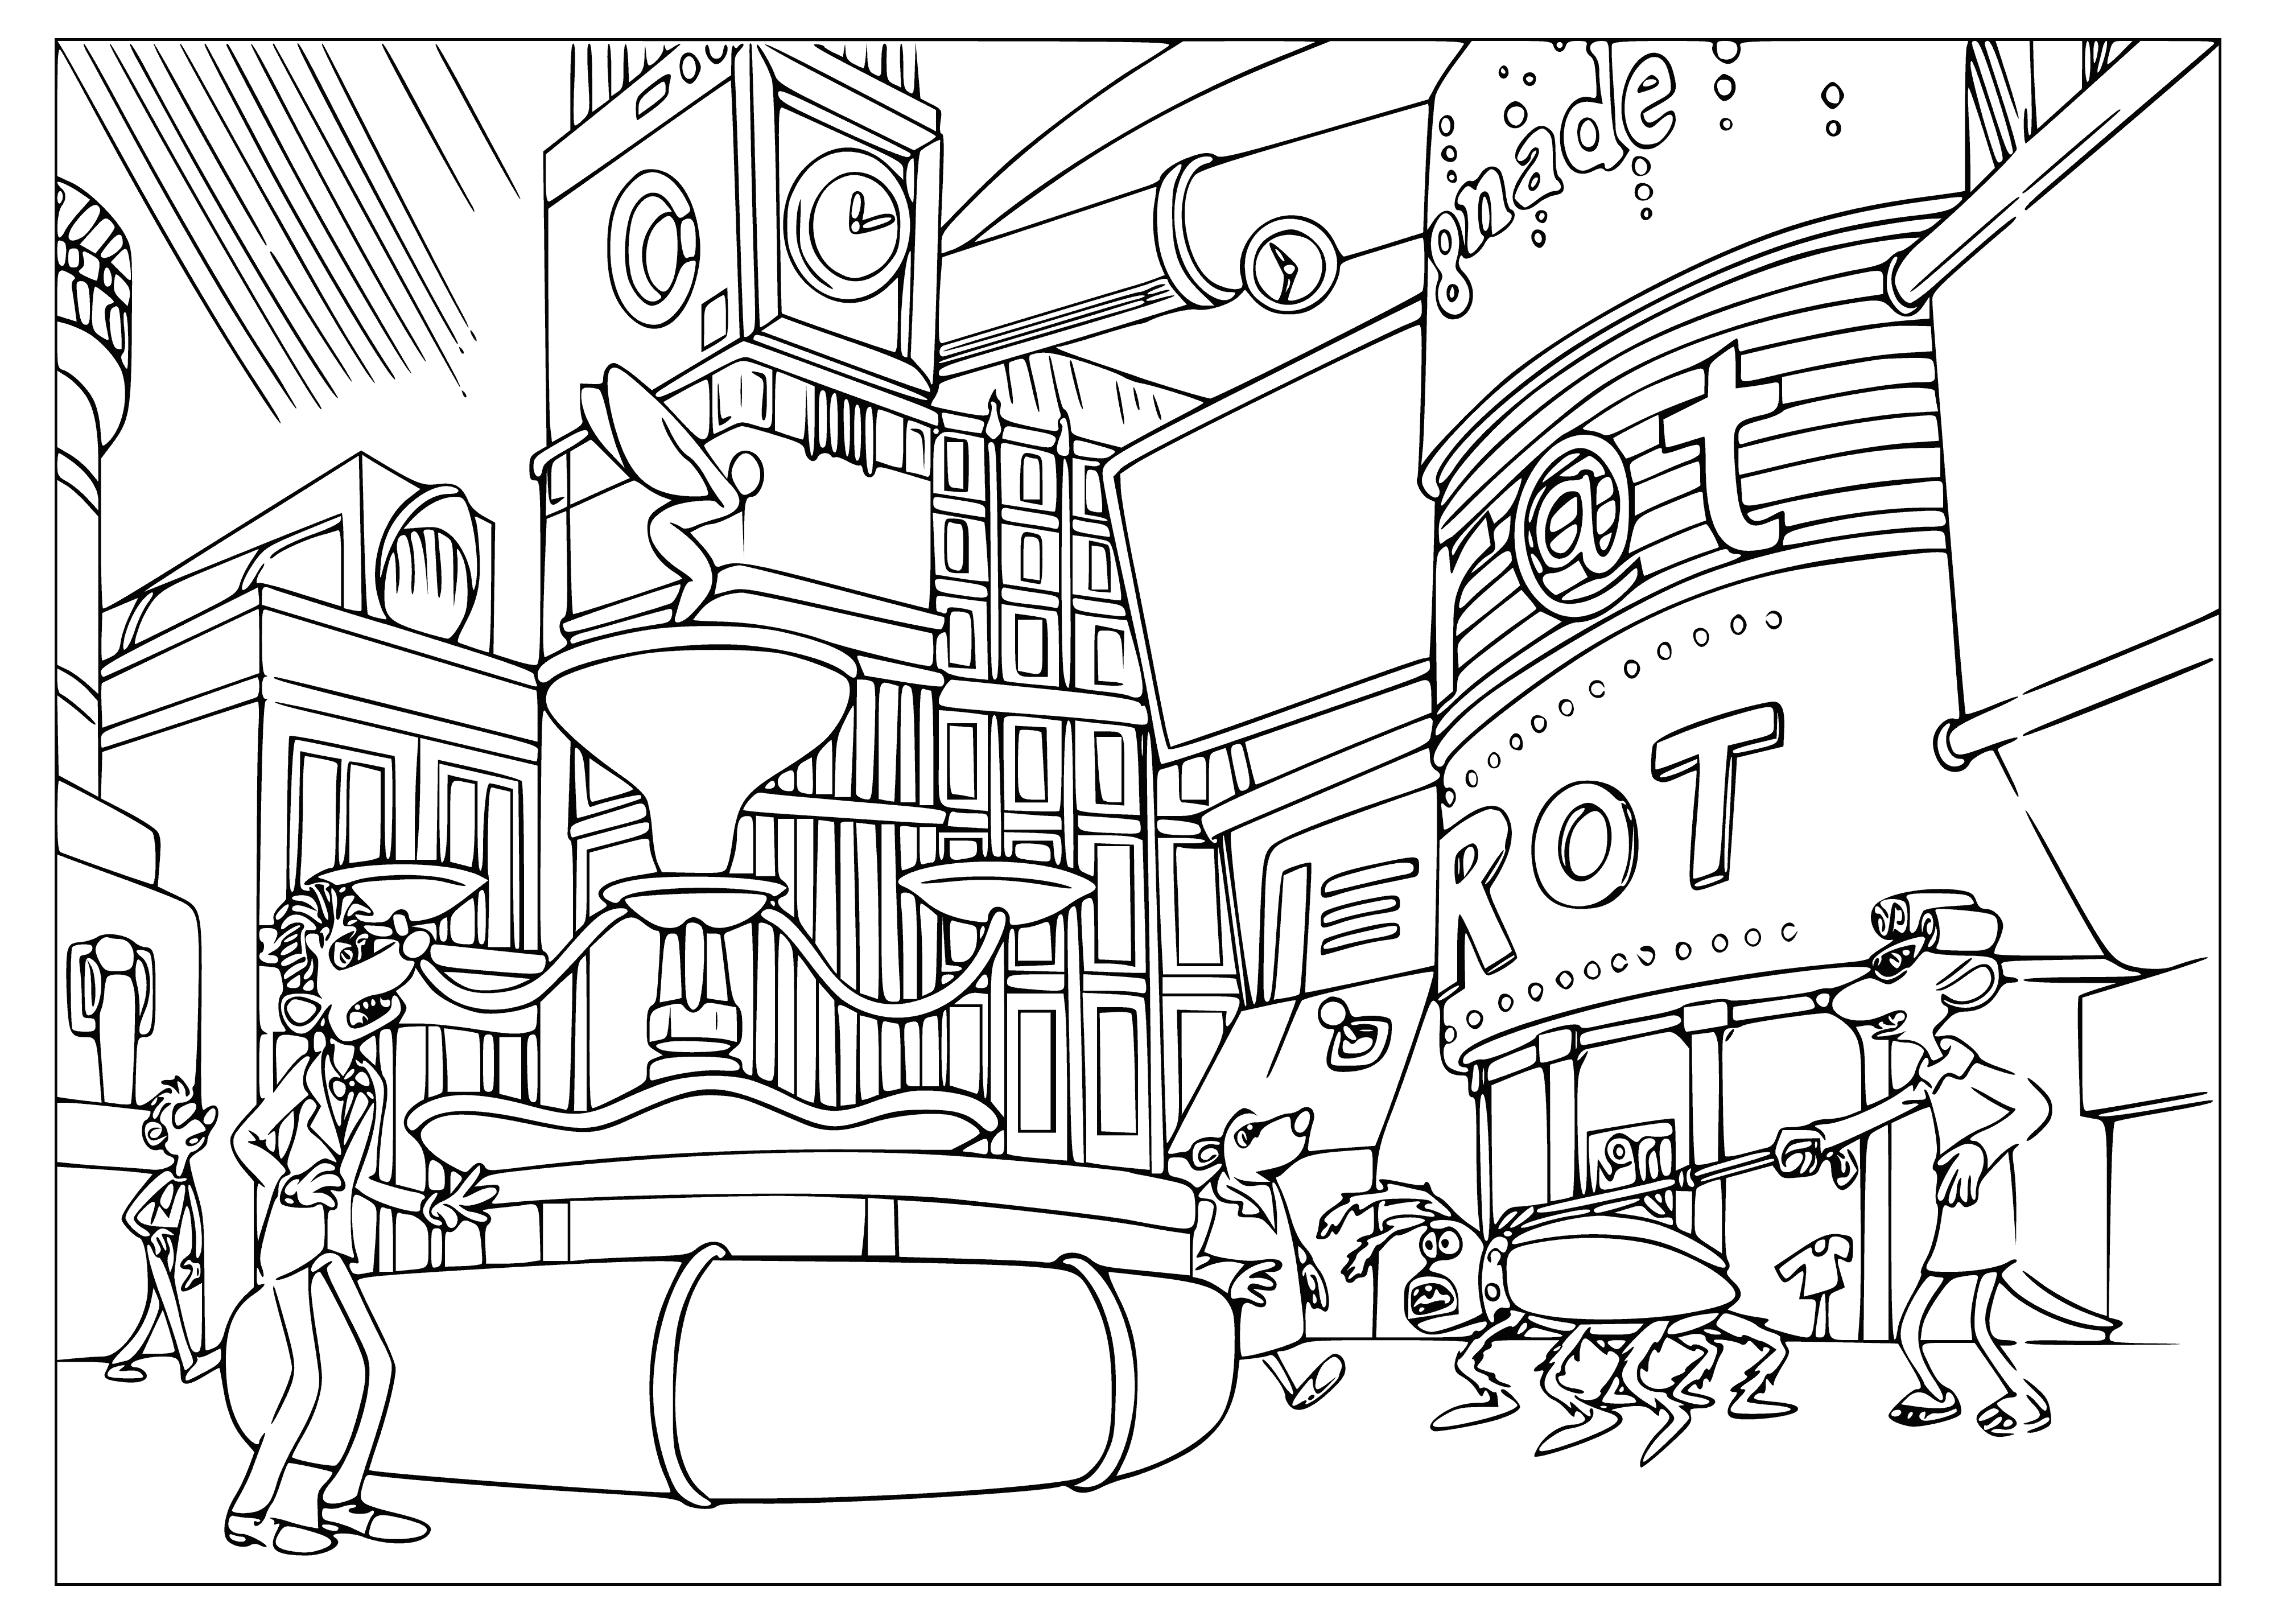 City in the sewers coloring page